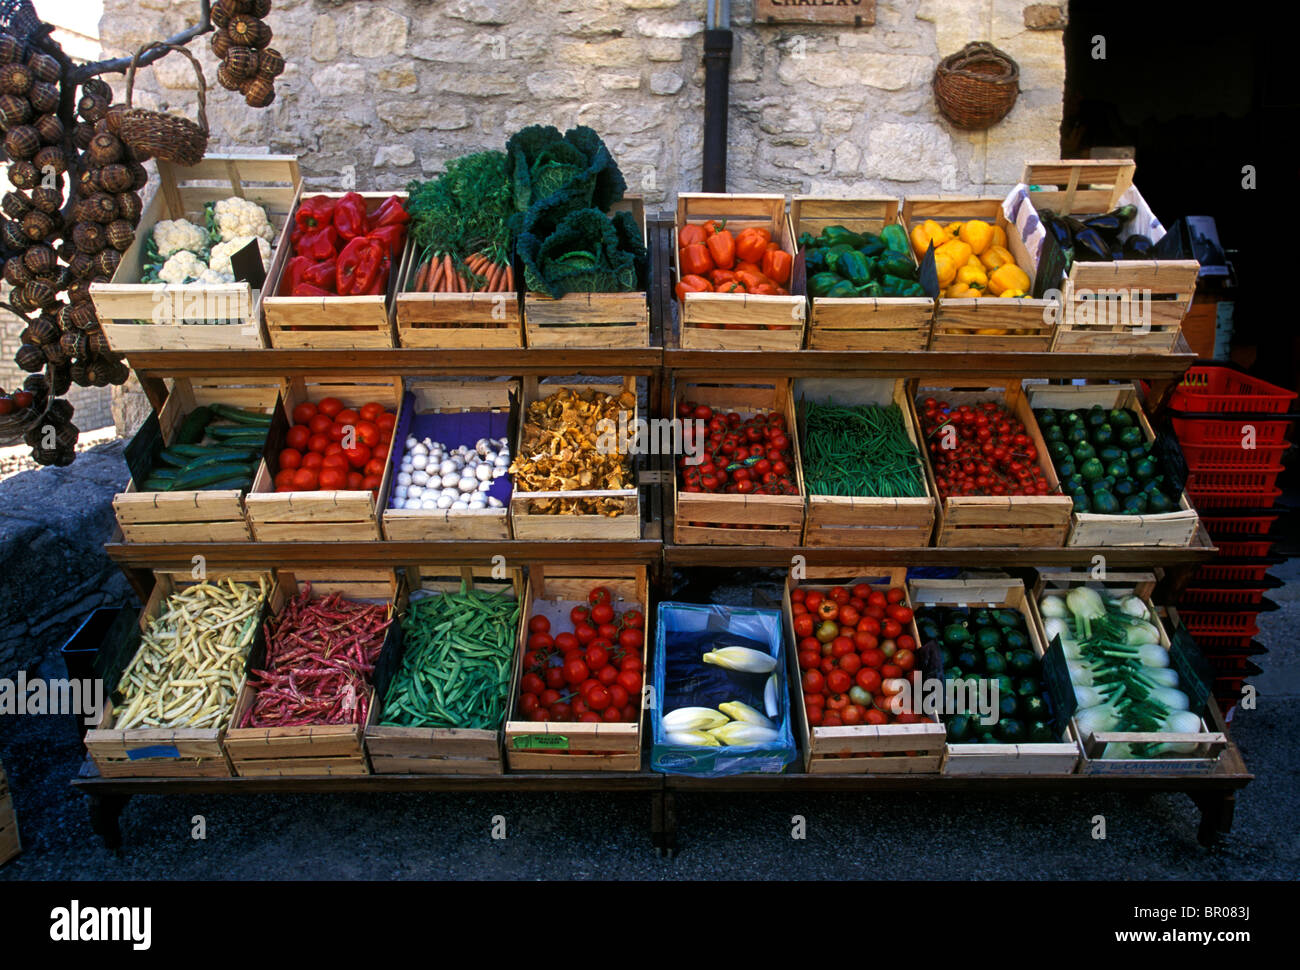 grocery store, fruit and vegetable market, hilltop village, hilltop village of Gordes, village of Gordes, Gordes, Provence, France, Europe Stock Photo